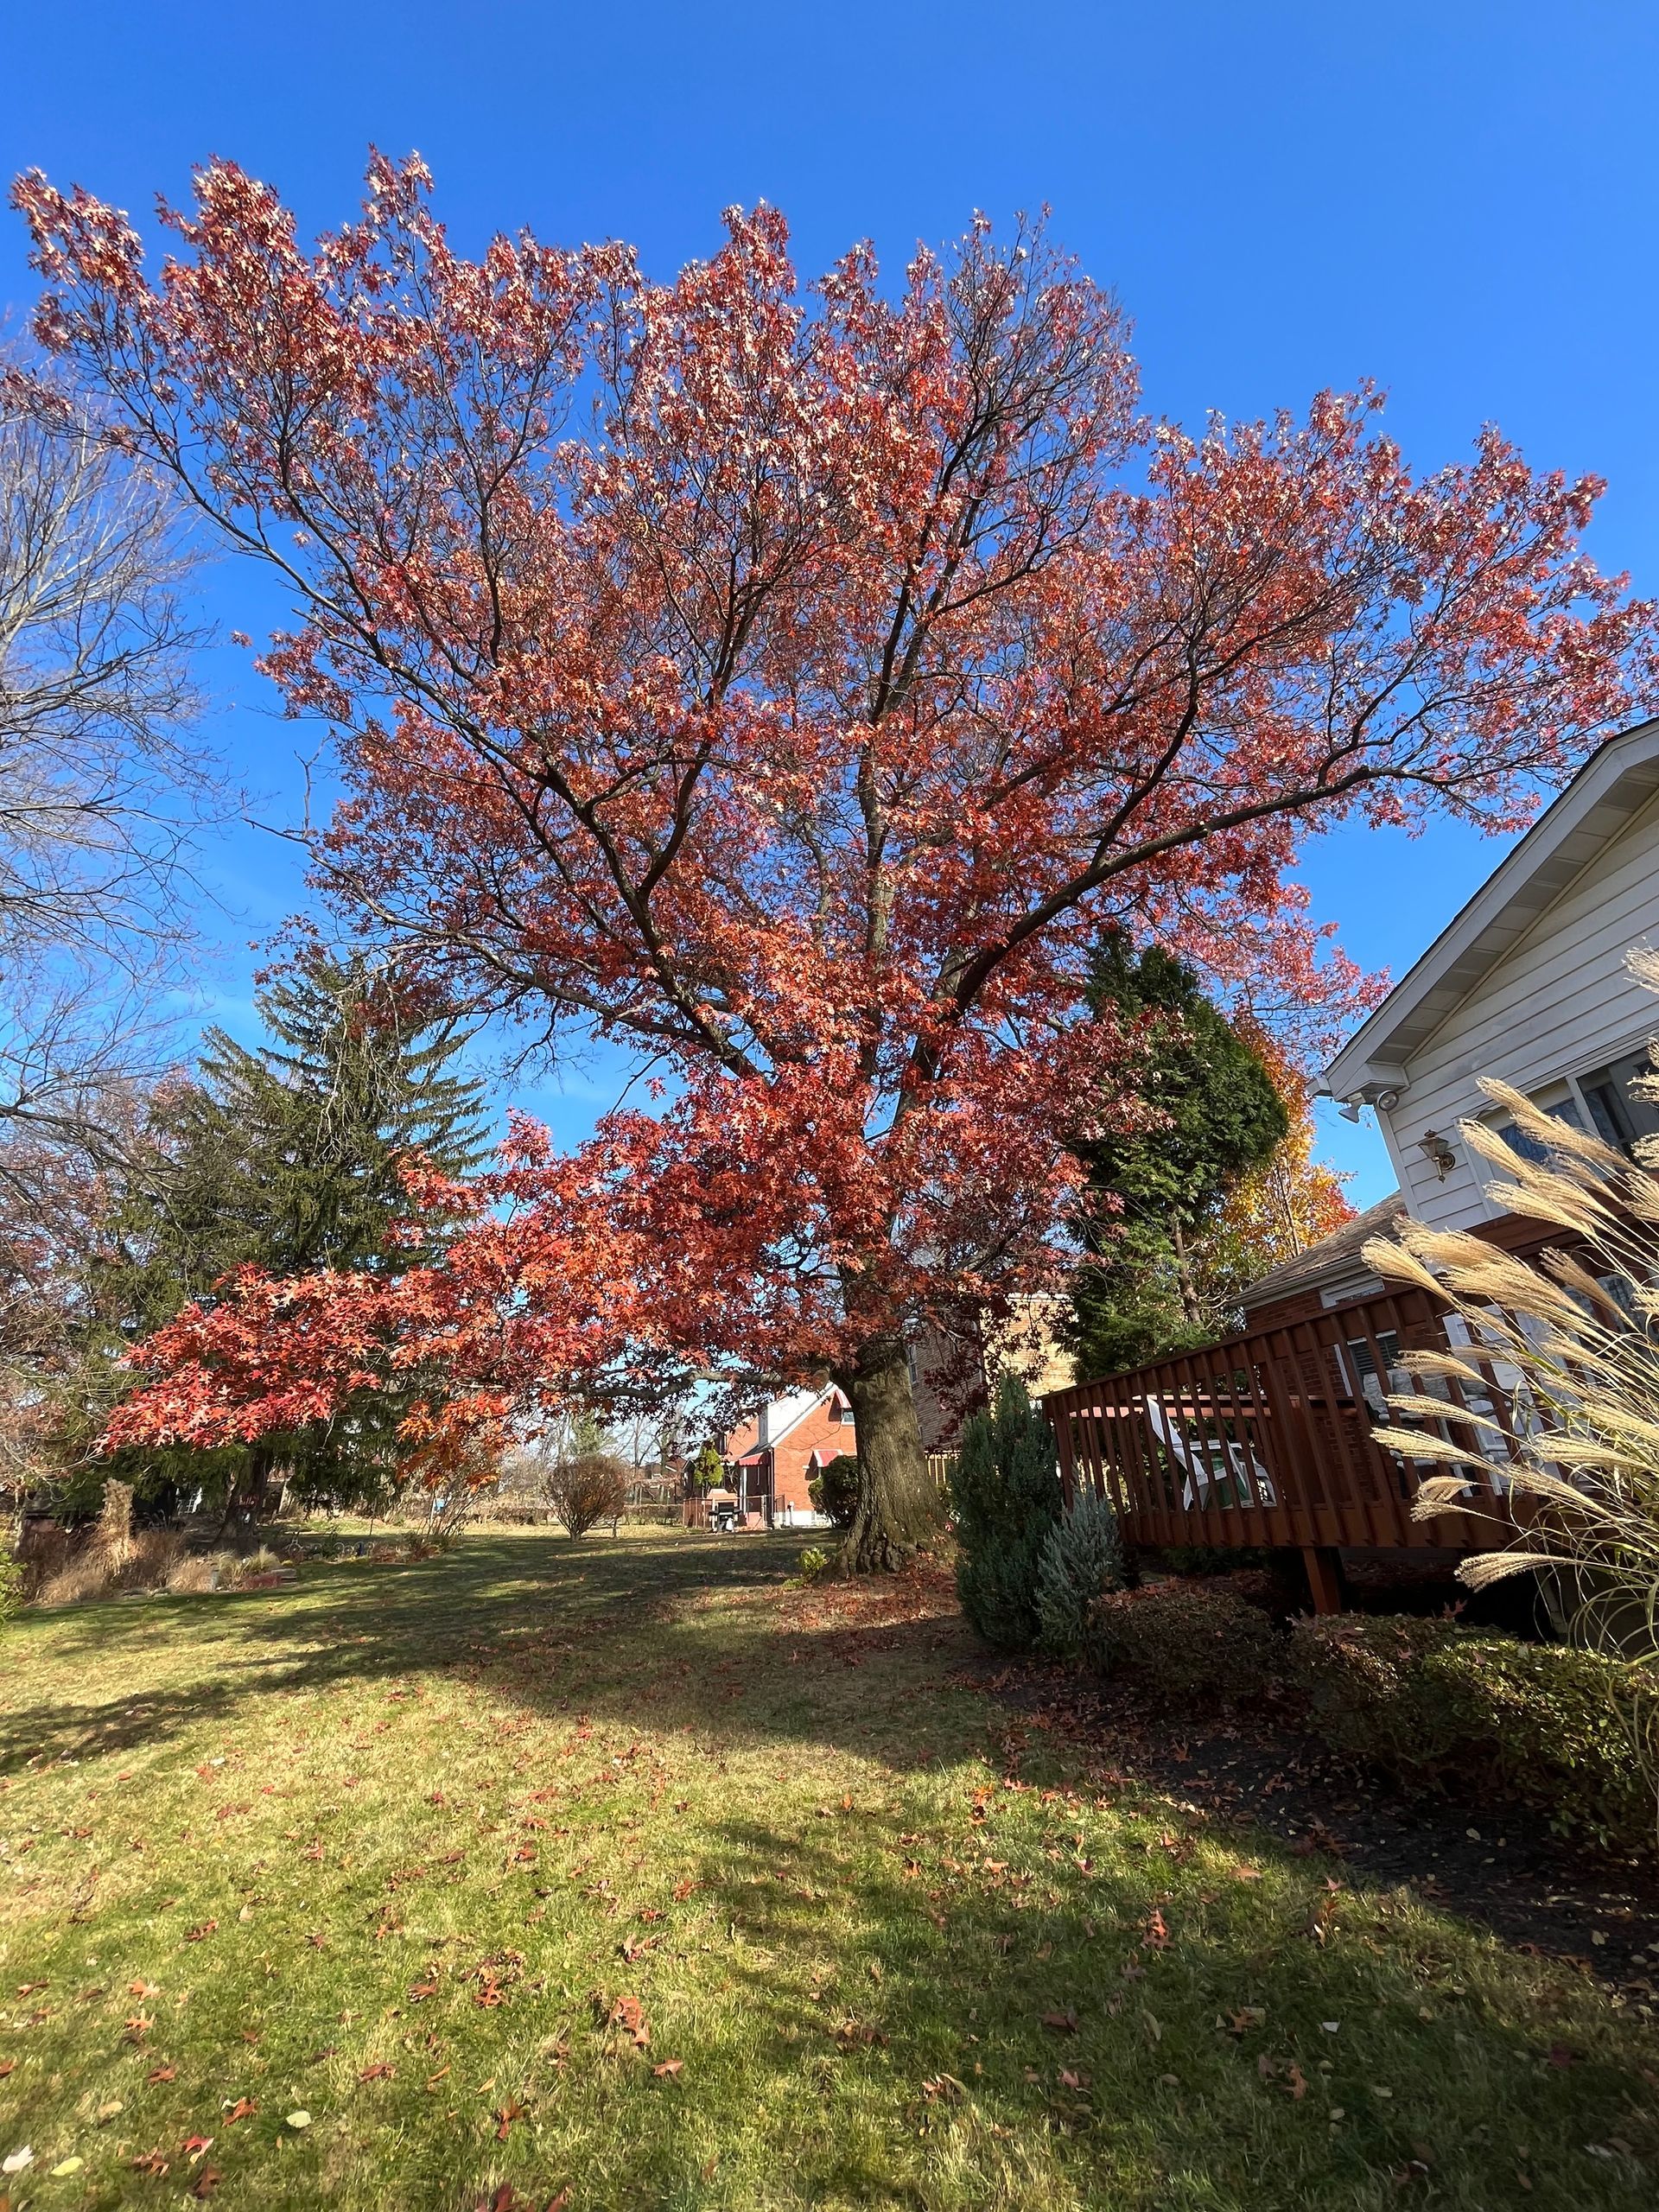 a tree with red leaves in a yard with a house in the background